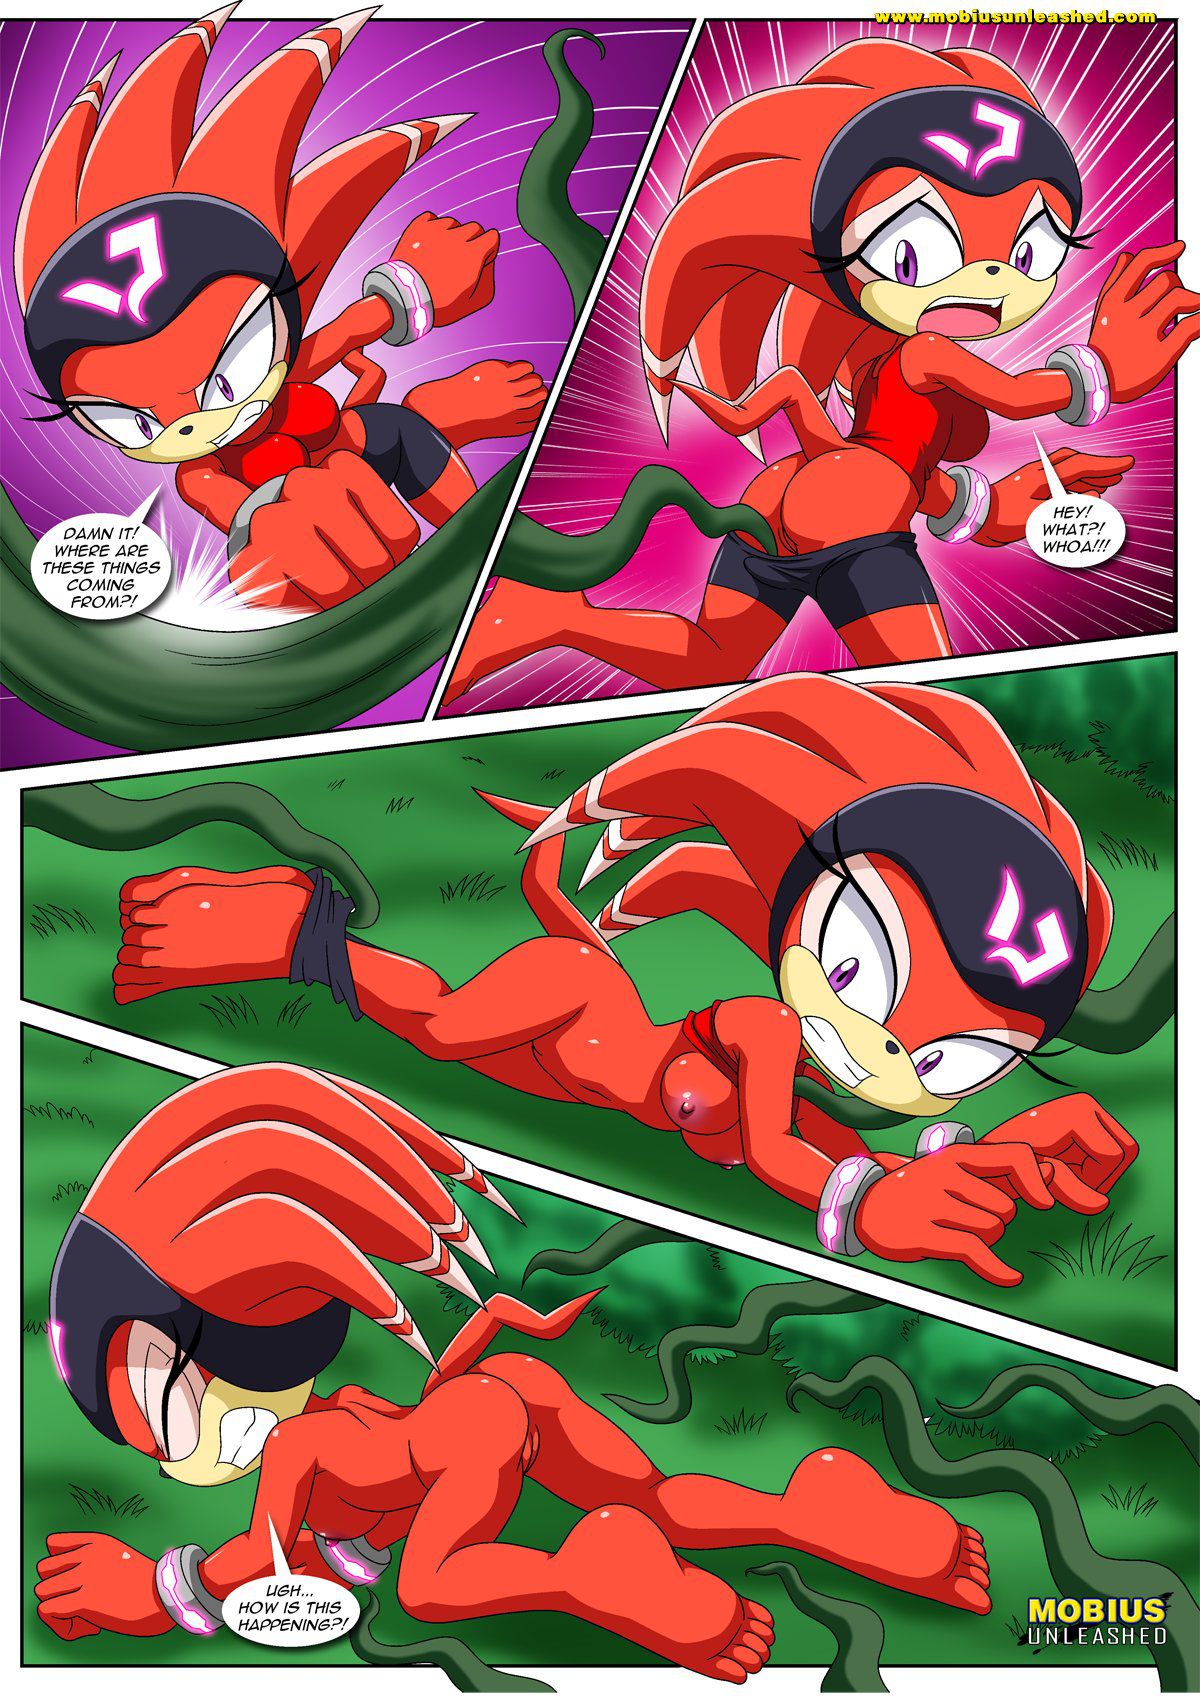 [Palcomix] Team GF's Tentacled Tale (Sonic The Hedgehog) [Ongoing] 8